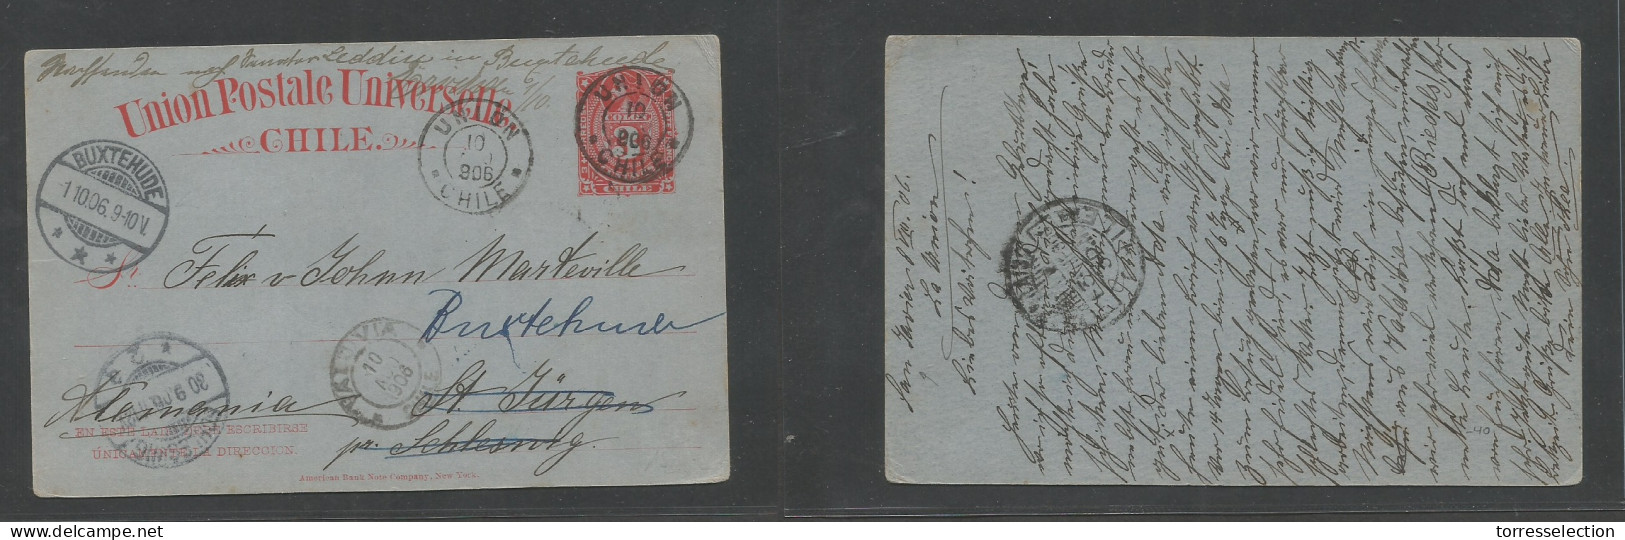 CHILE - Stationery. 1906 (8 Aug) San Javier - Germany, Schlewig, Buxtehude (1 Oct) Via Union - Valdivia 3c Red / Bluish  - Cile